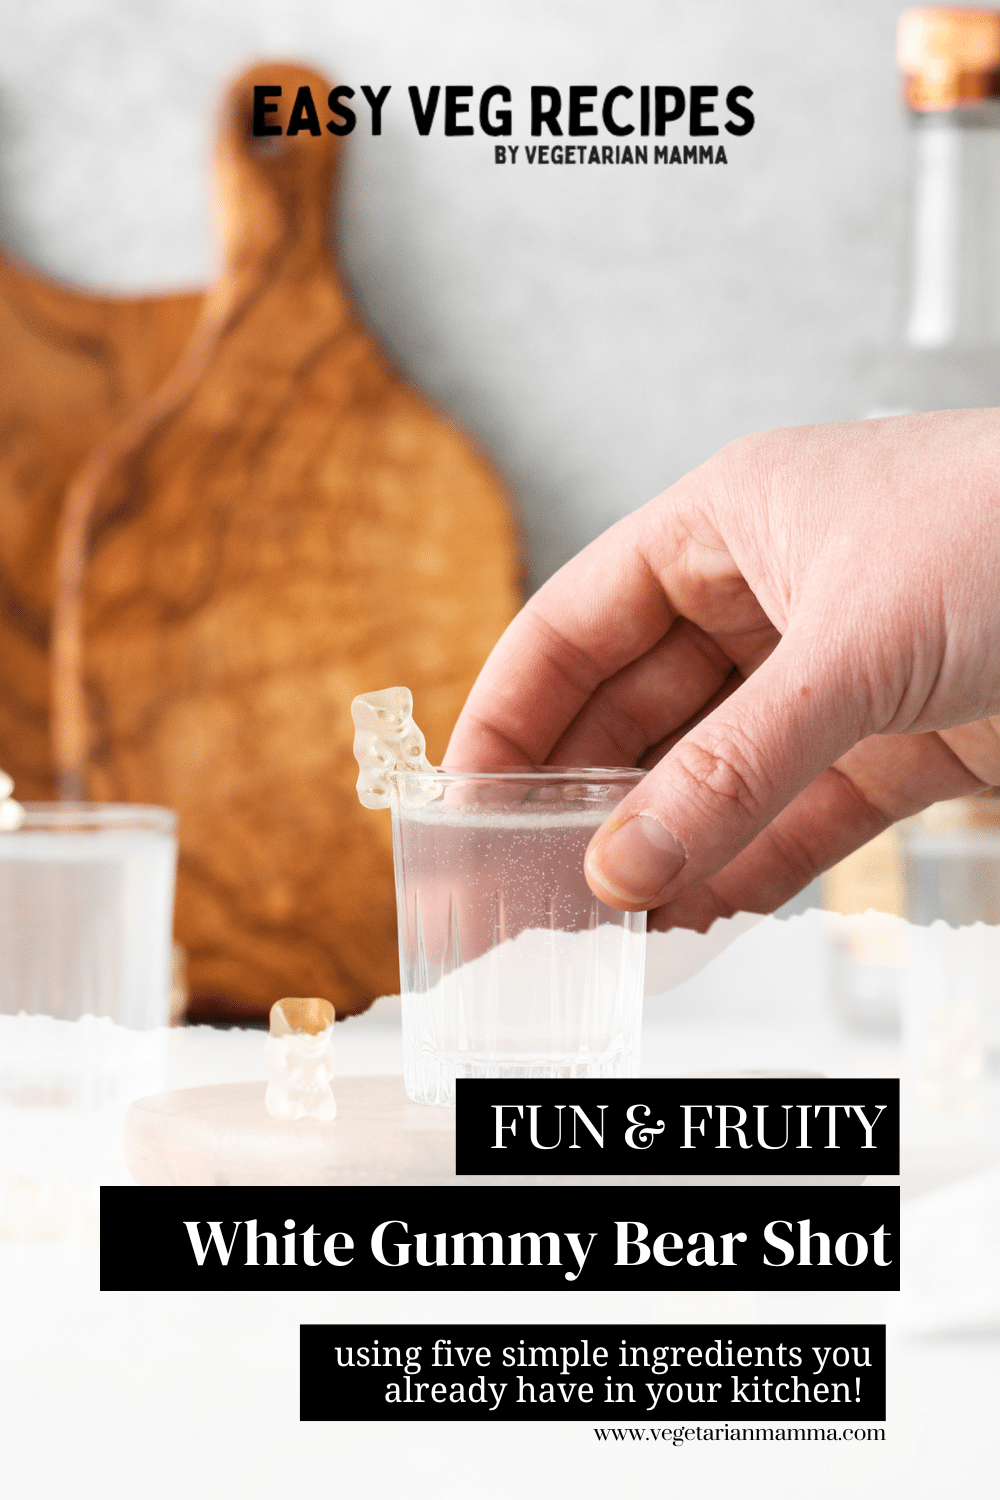 It's called a White Gummy Bear Shot because it's full of sweet, fruity flavor just like your favorite gummy candies! Serve this tasty drink with a gummy bear on the side for the best party results.